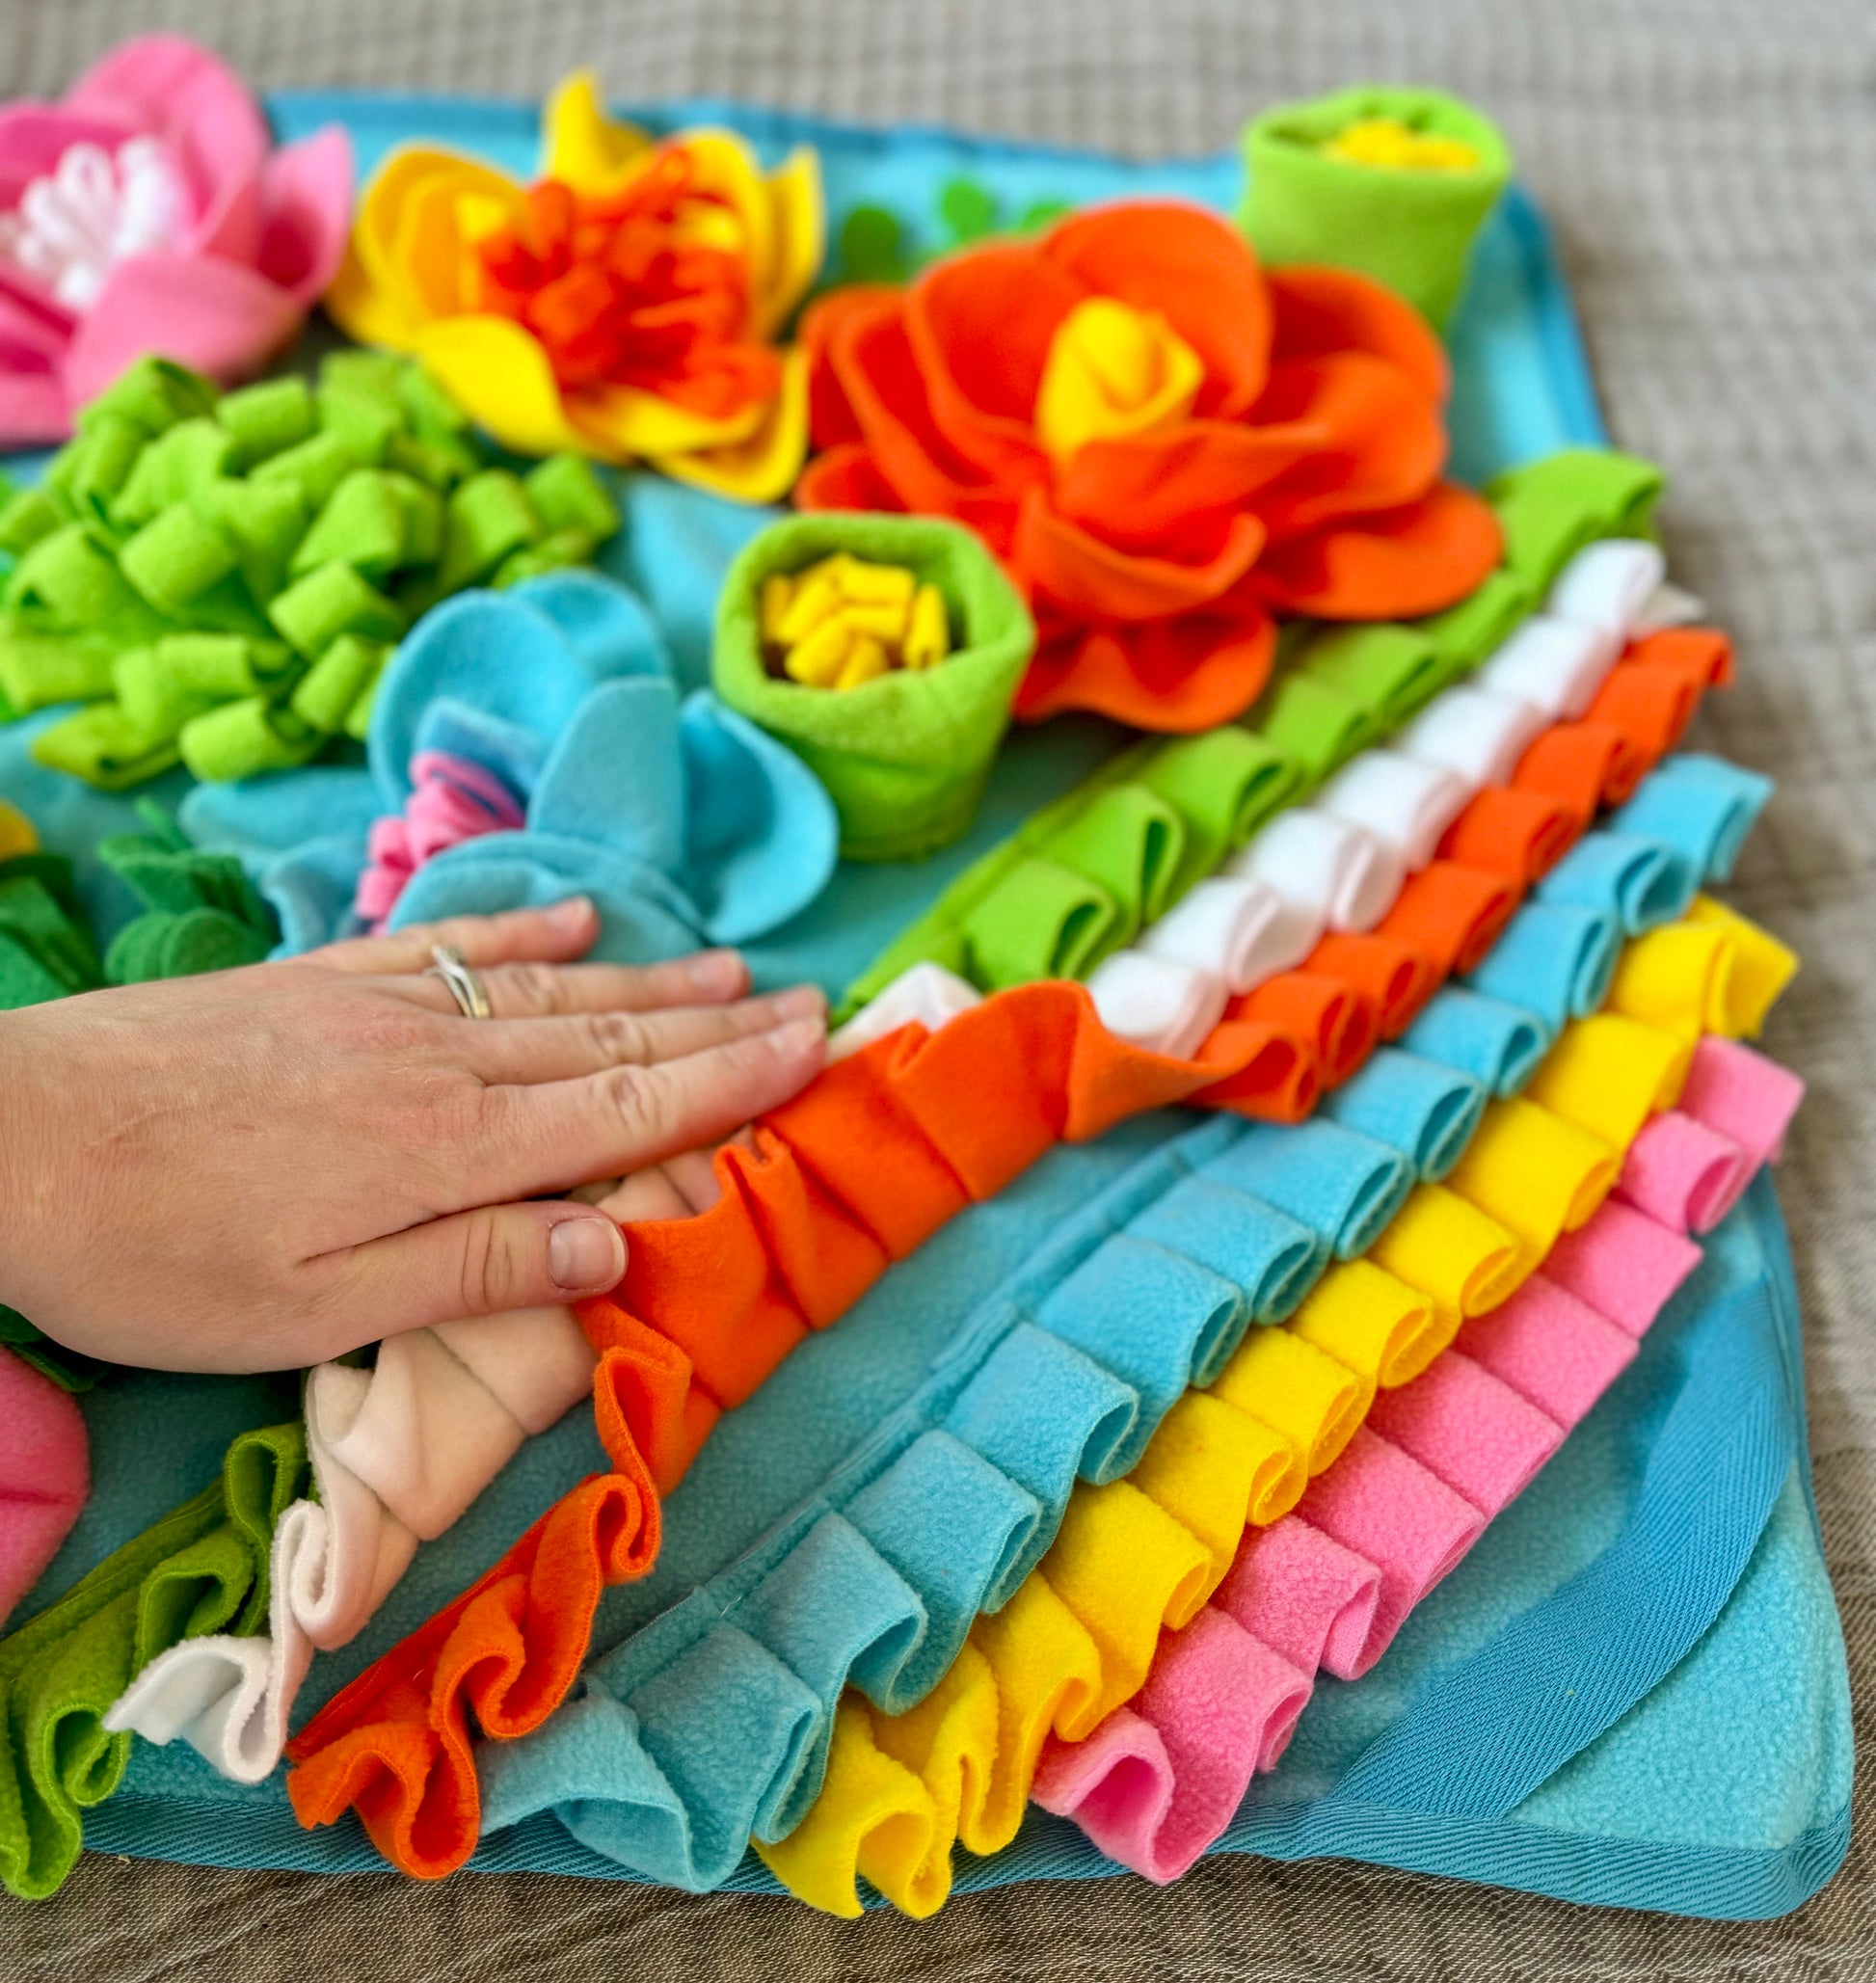 Rainbow Flower Snuffle Mat | Foraging toy, boredom busting enrichment for bunnies, hamsters, guinea pigs and other small animals